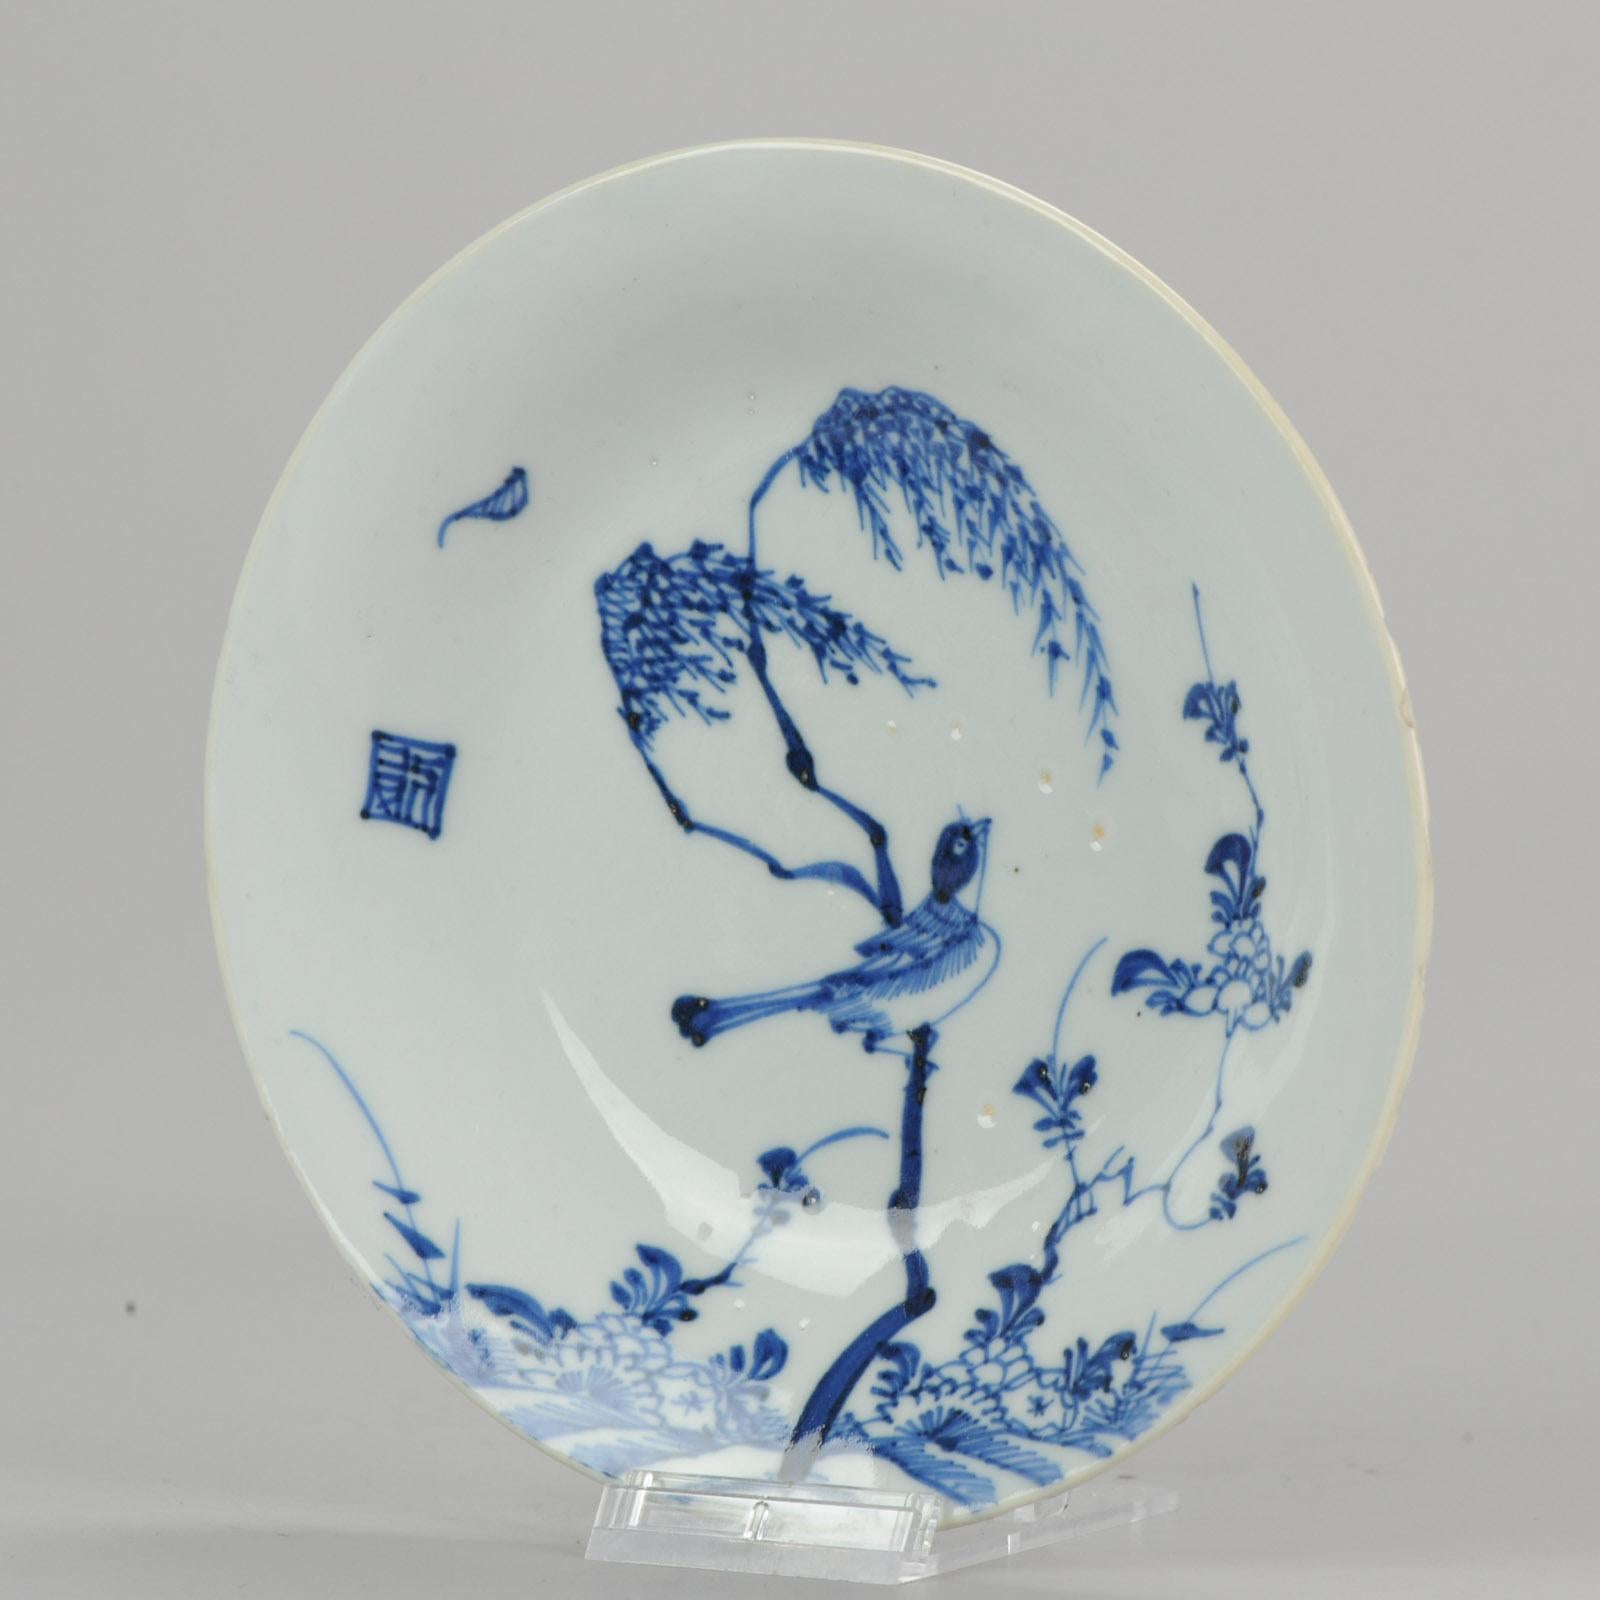 A very nice plate with a bird in a garden and a mark, early 17th century. Rare plate!

9-8-19-1-4

Symbolism

Magpie (xi que). The 